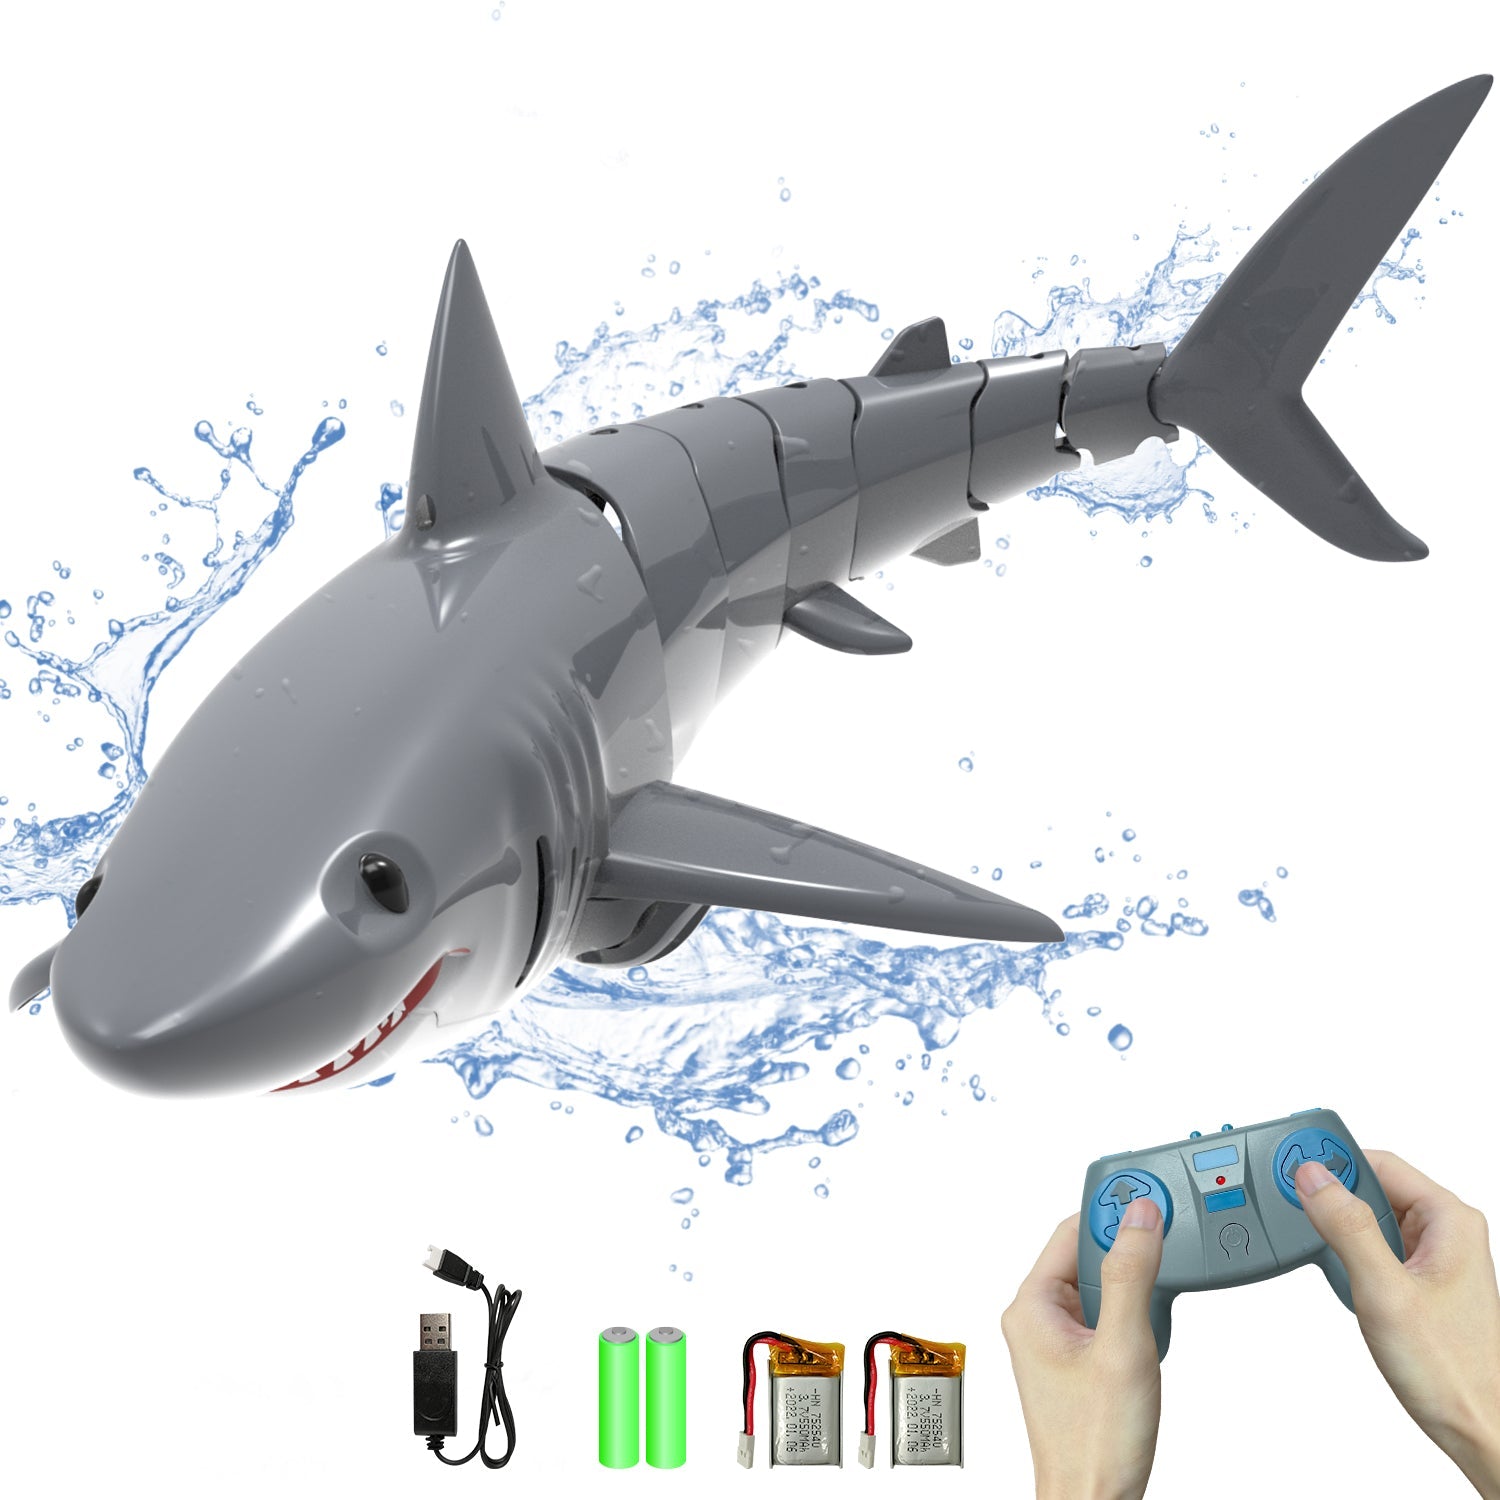 EXHOBBY RC Shark Toys Great Gift For Kids.